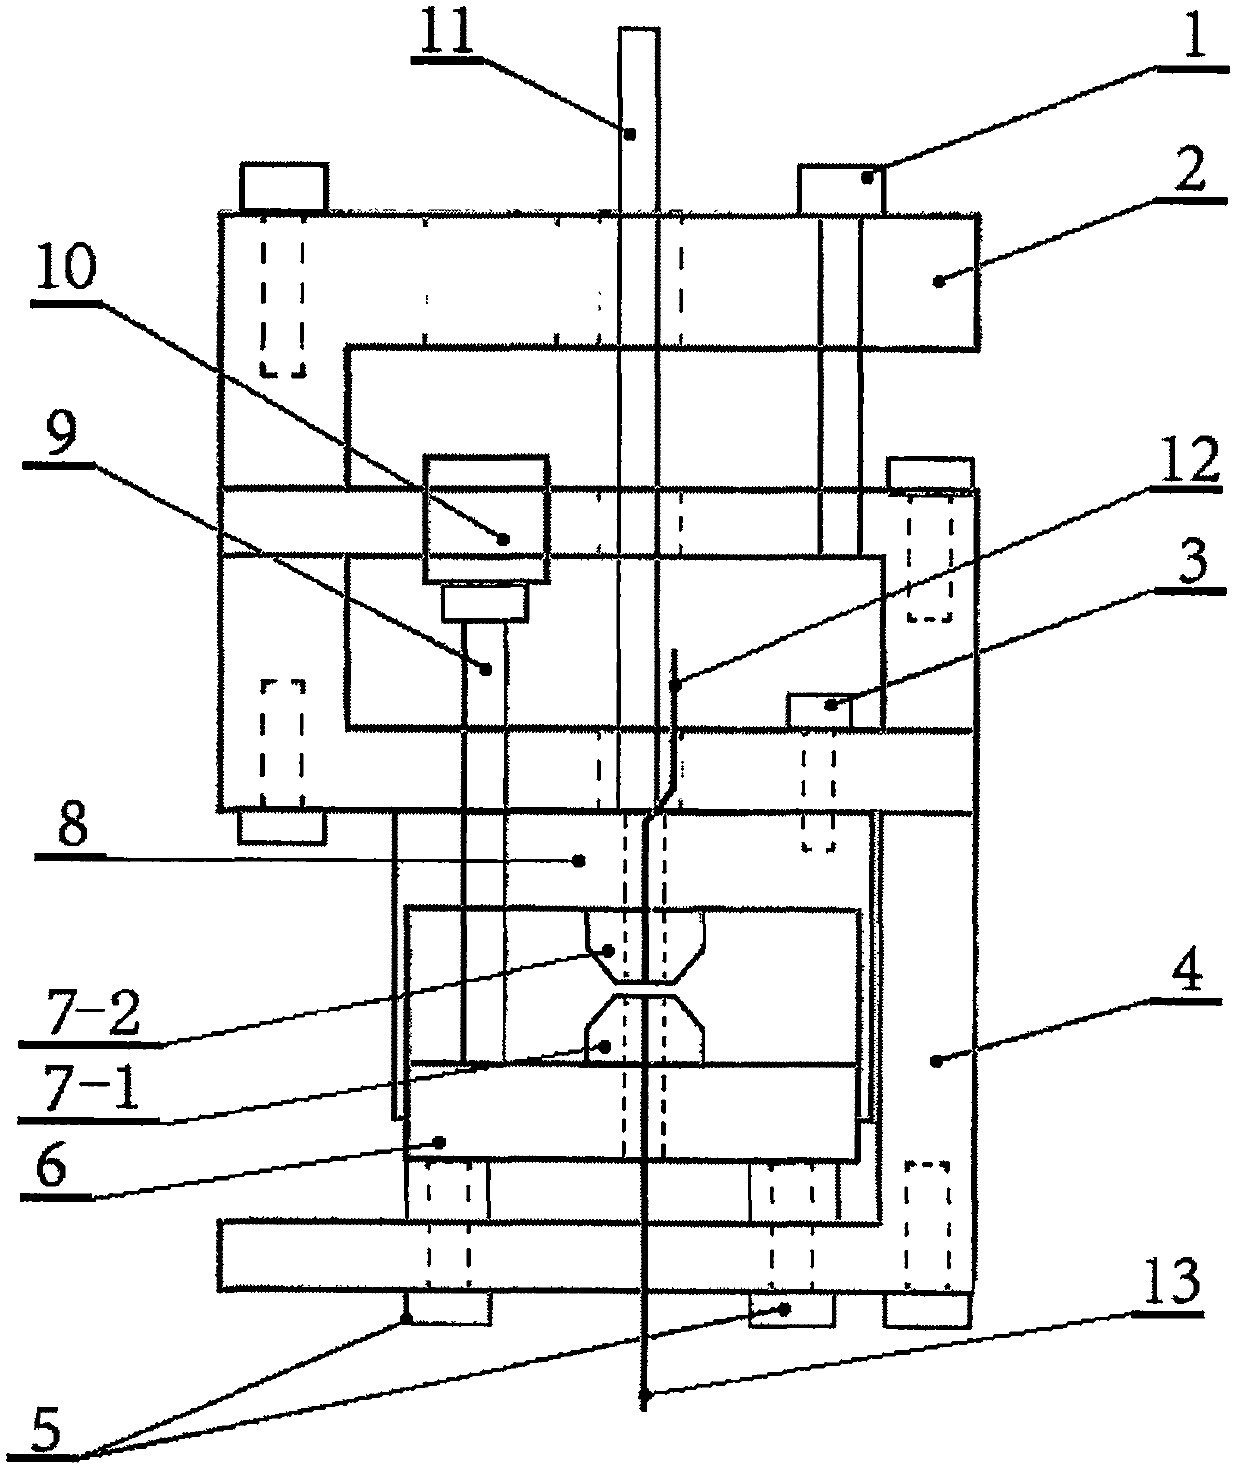 Testing method for dielectric property of liquid sample in high-pressure condition